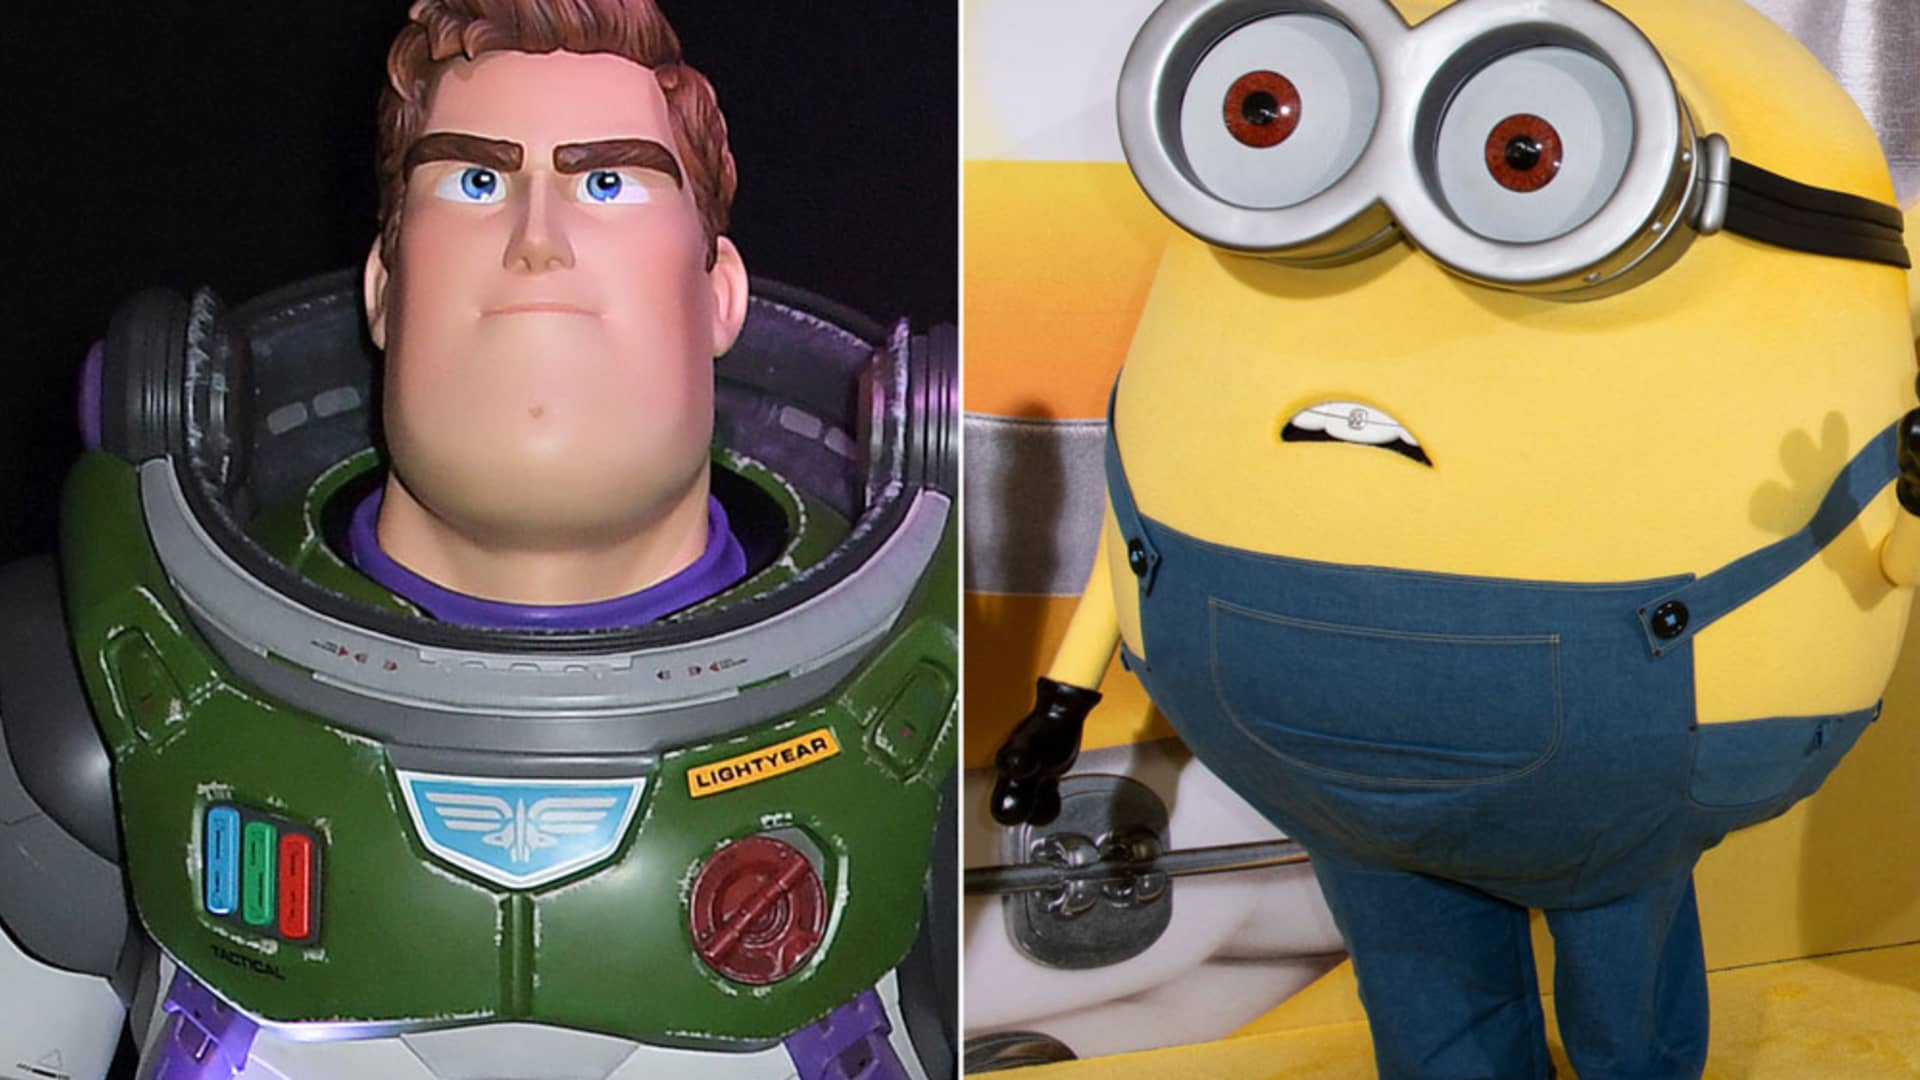 'Minions' vs. 'Lightyear': Here's why the silly yellow blobs beat Buzz at the box office